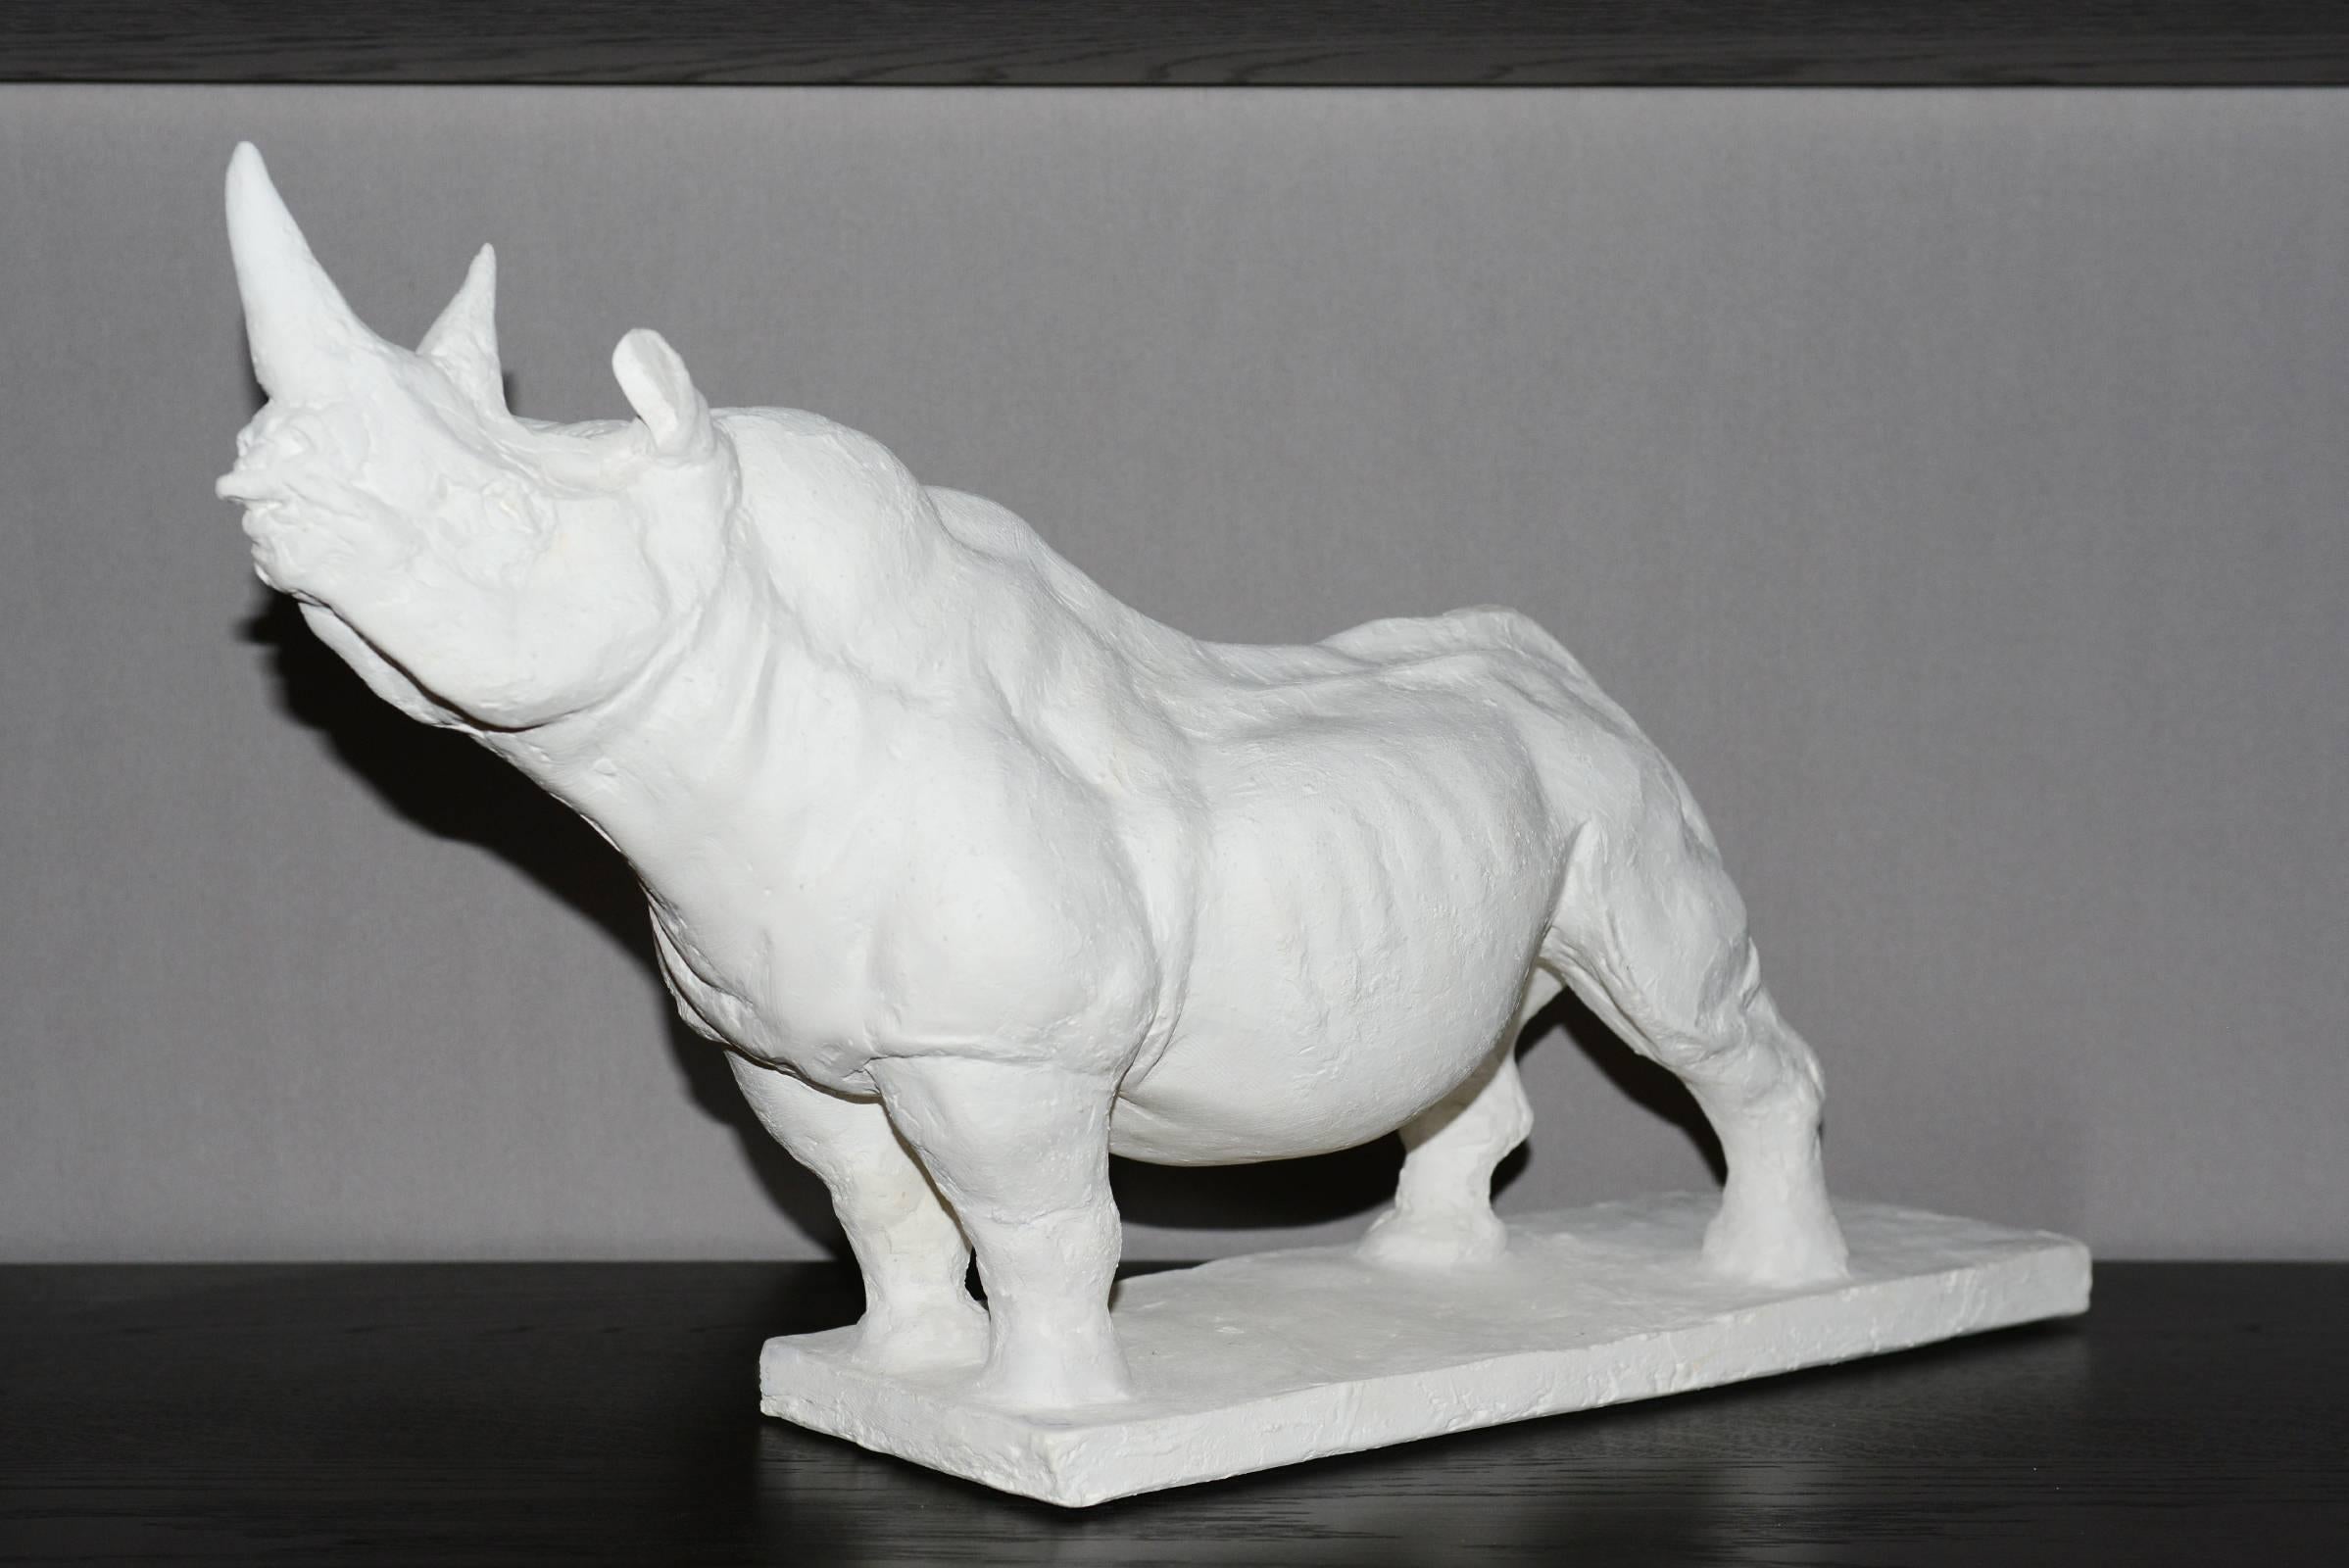 Sculpture Rhinoceros in plaster.
Limited and Numerated Edition 25/60.
Made in France by J.B Vandame in 2015.

 